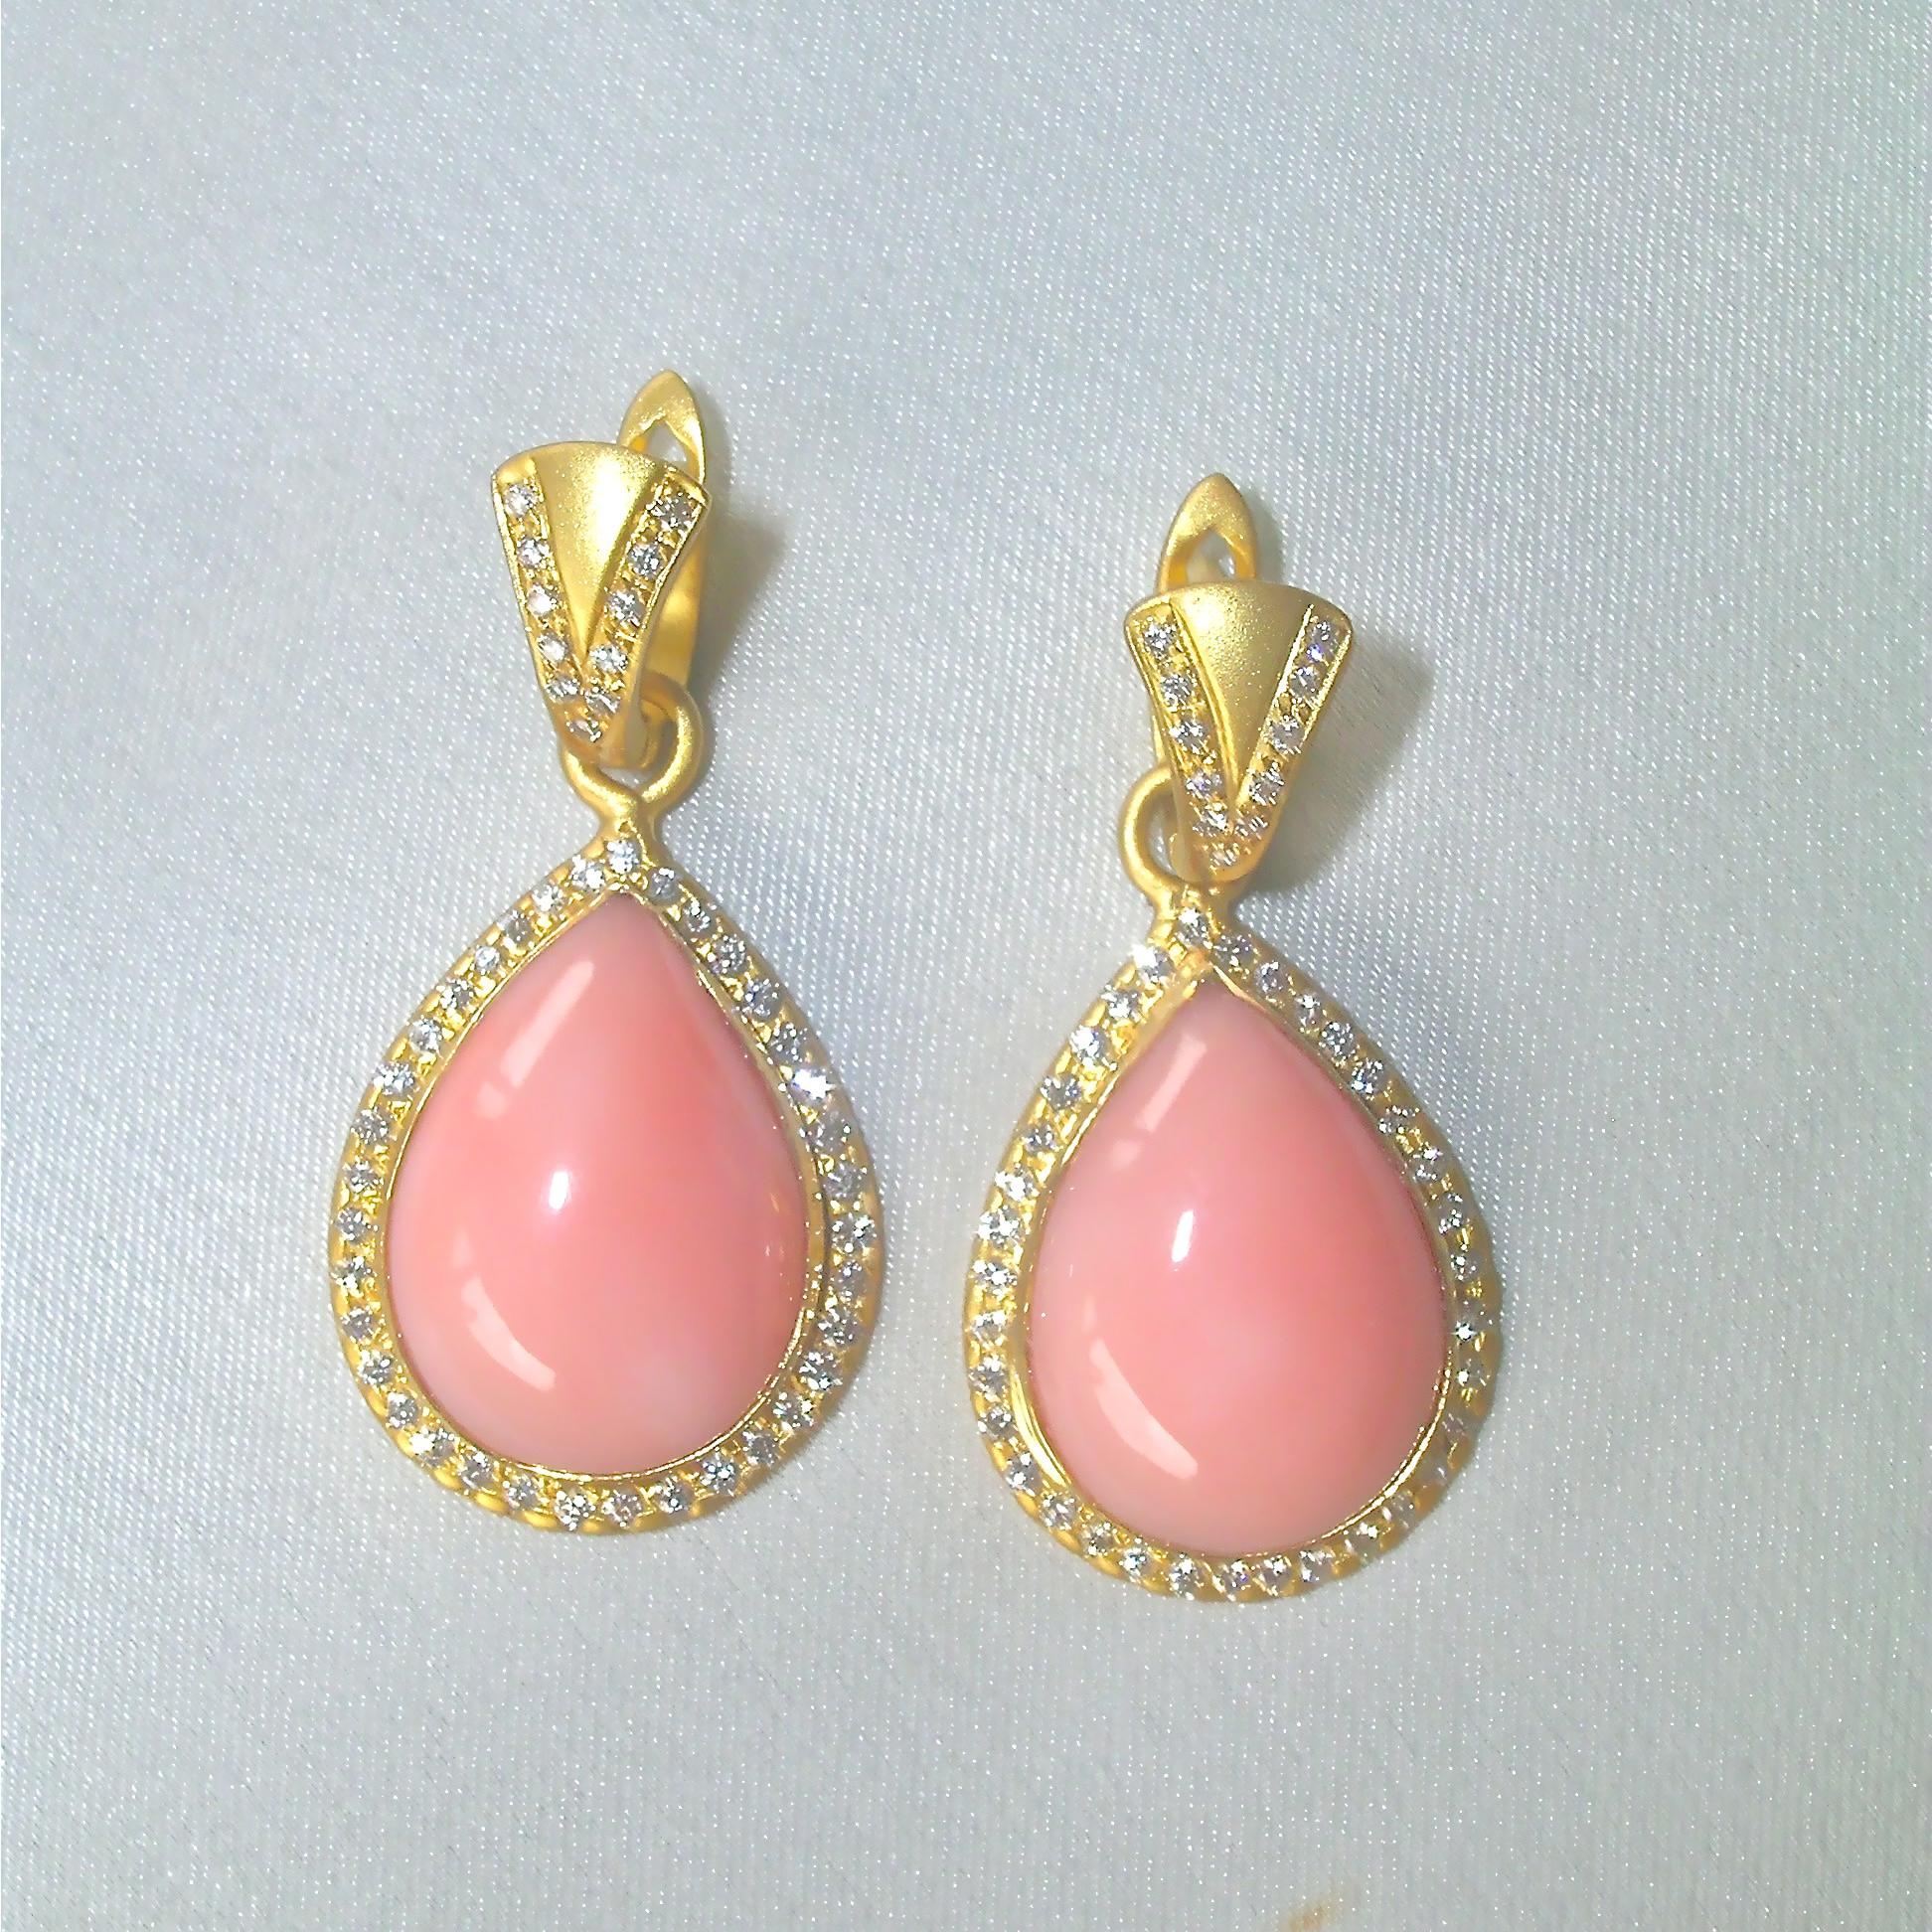 Pink Opals are quite beautiful.  This pair is set with diamonds around in satin finished 18k Gold.
Great for everyday or evening, always part of Nancy's designs.